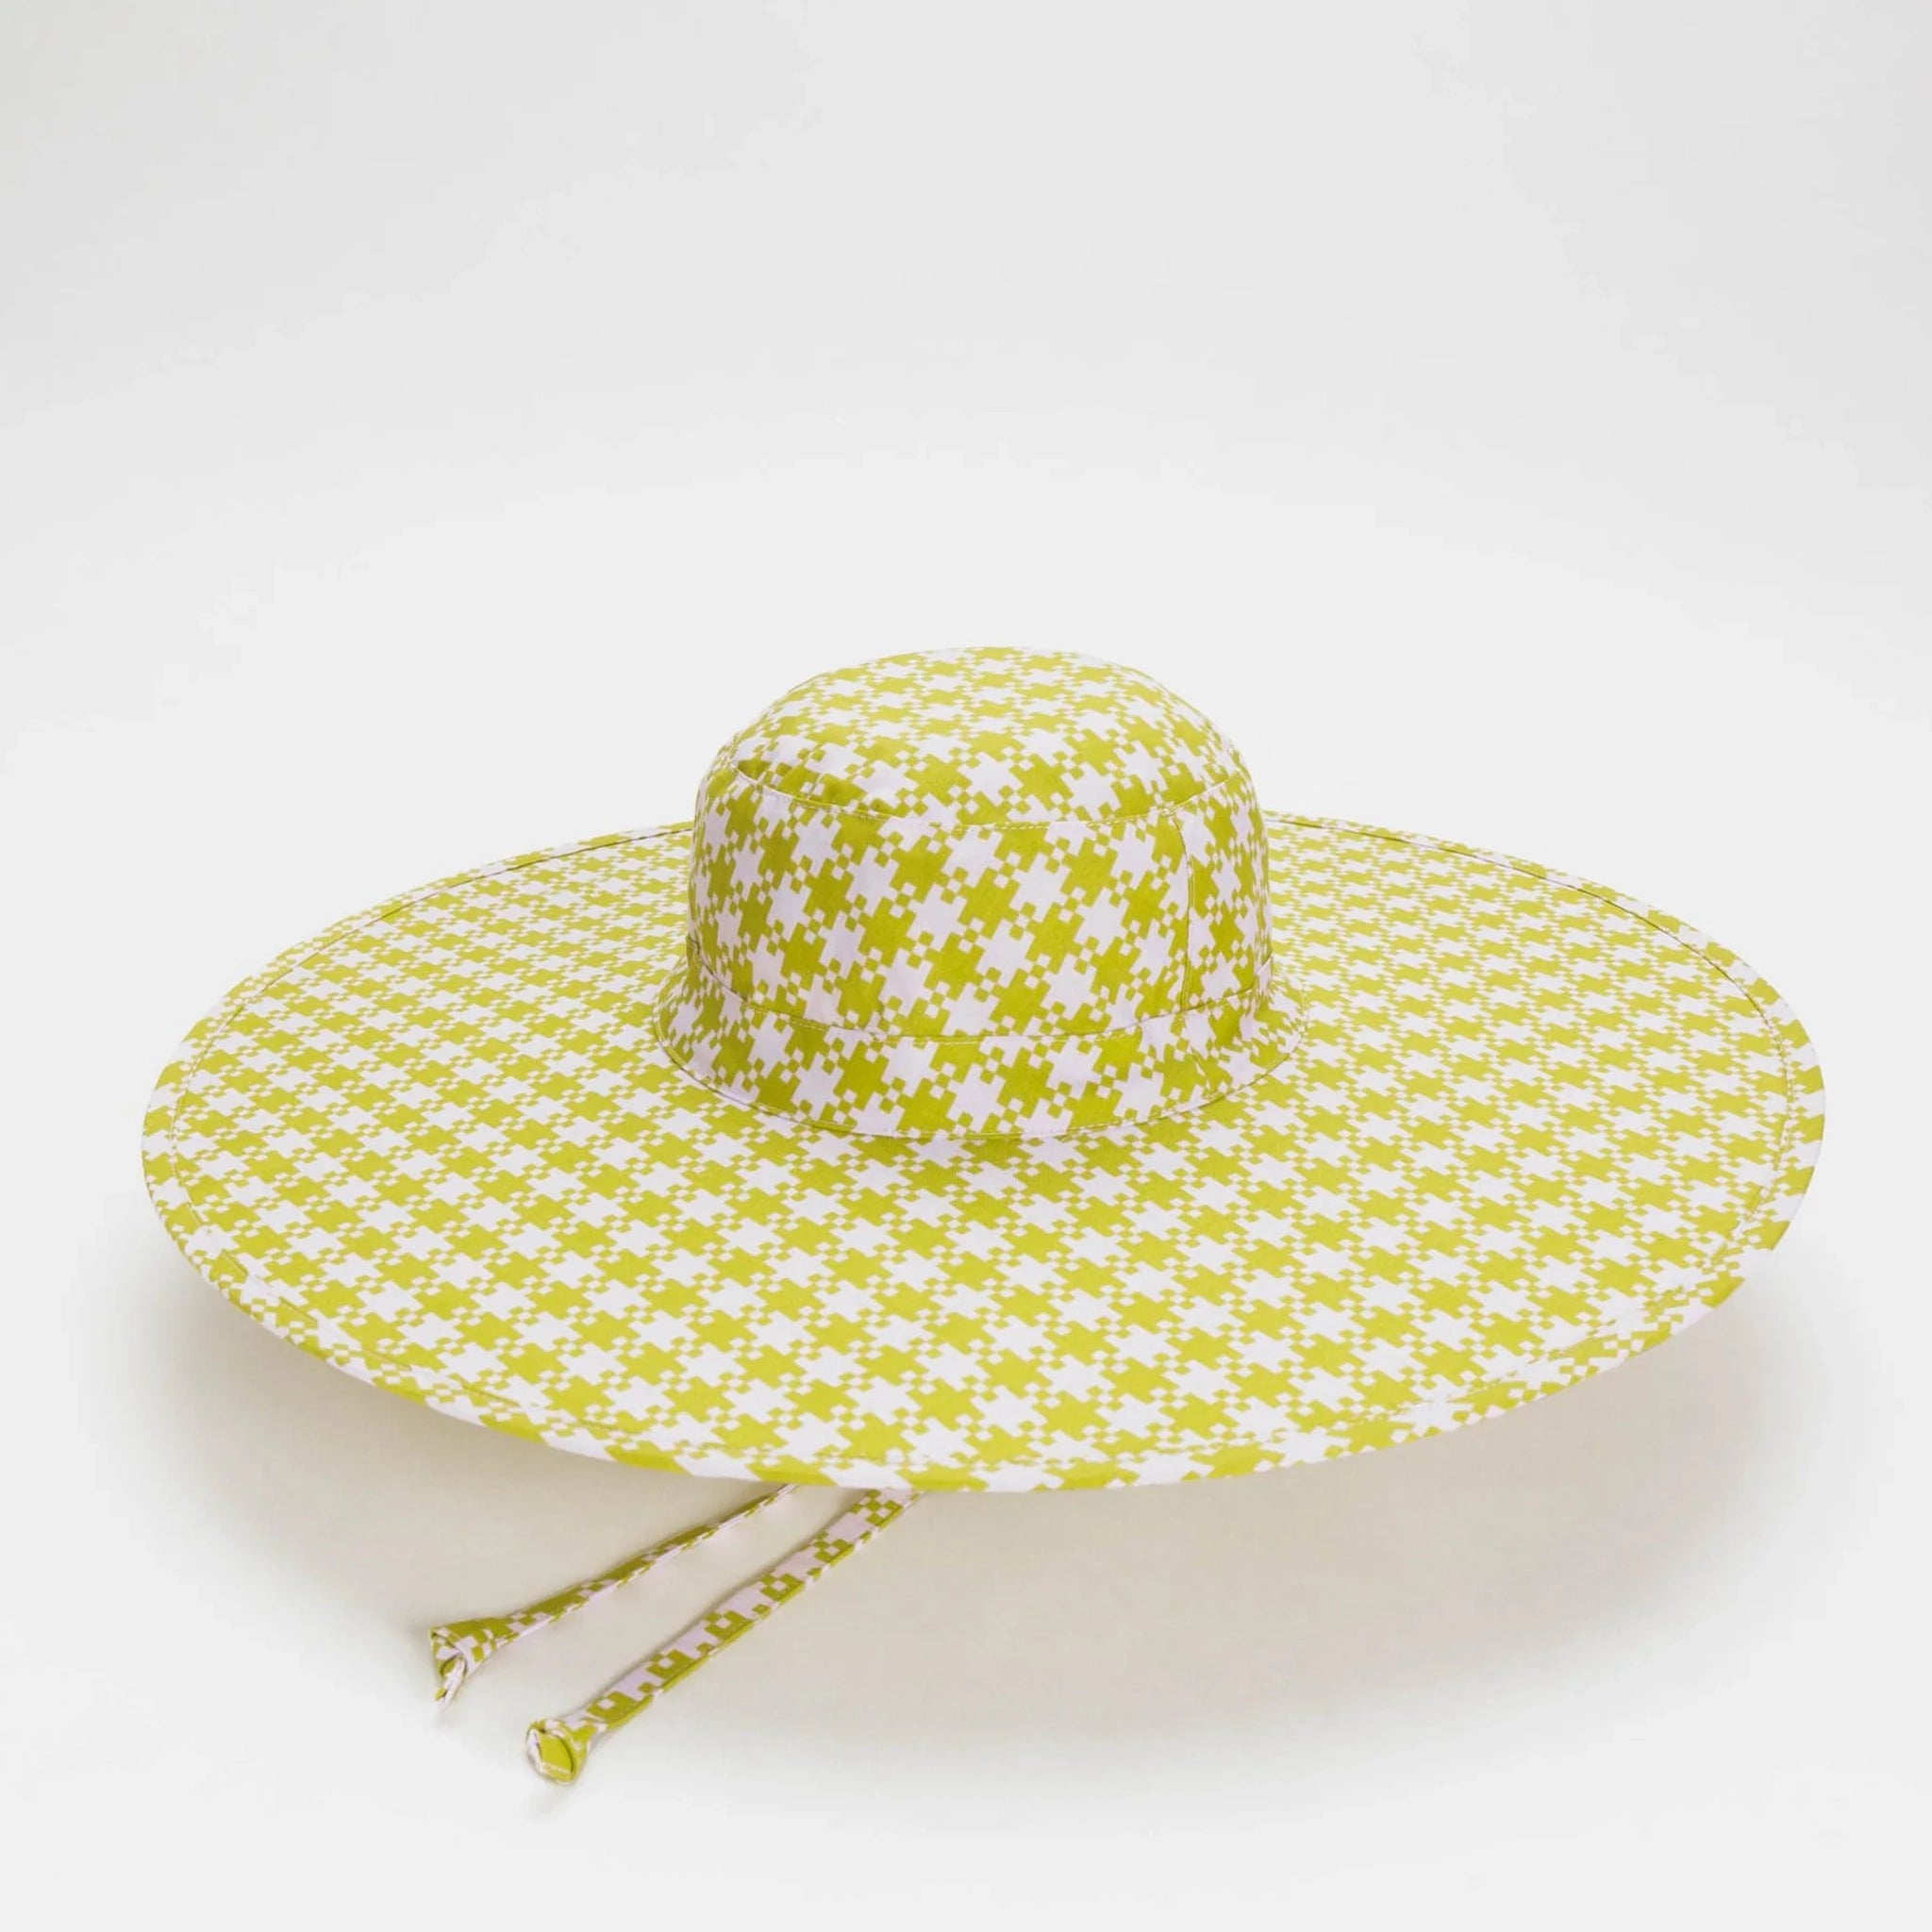 On a light grey background is a green and light pink gingham printed hat with a wide brim and features a nylon material that can fold up for easy traveling. 